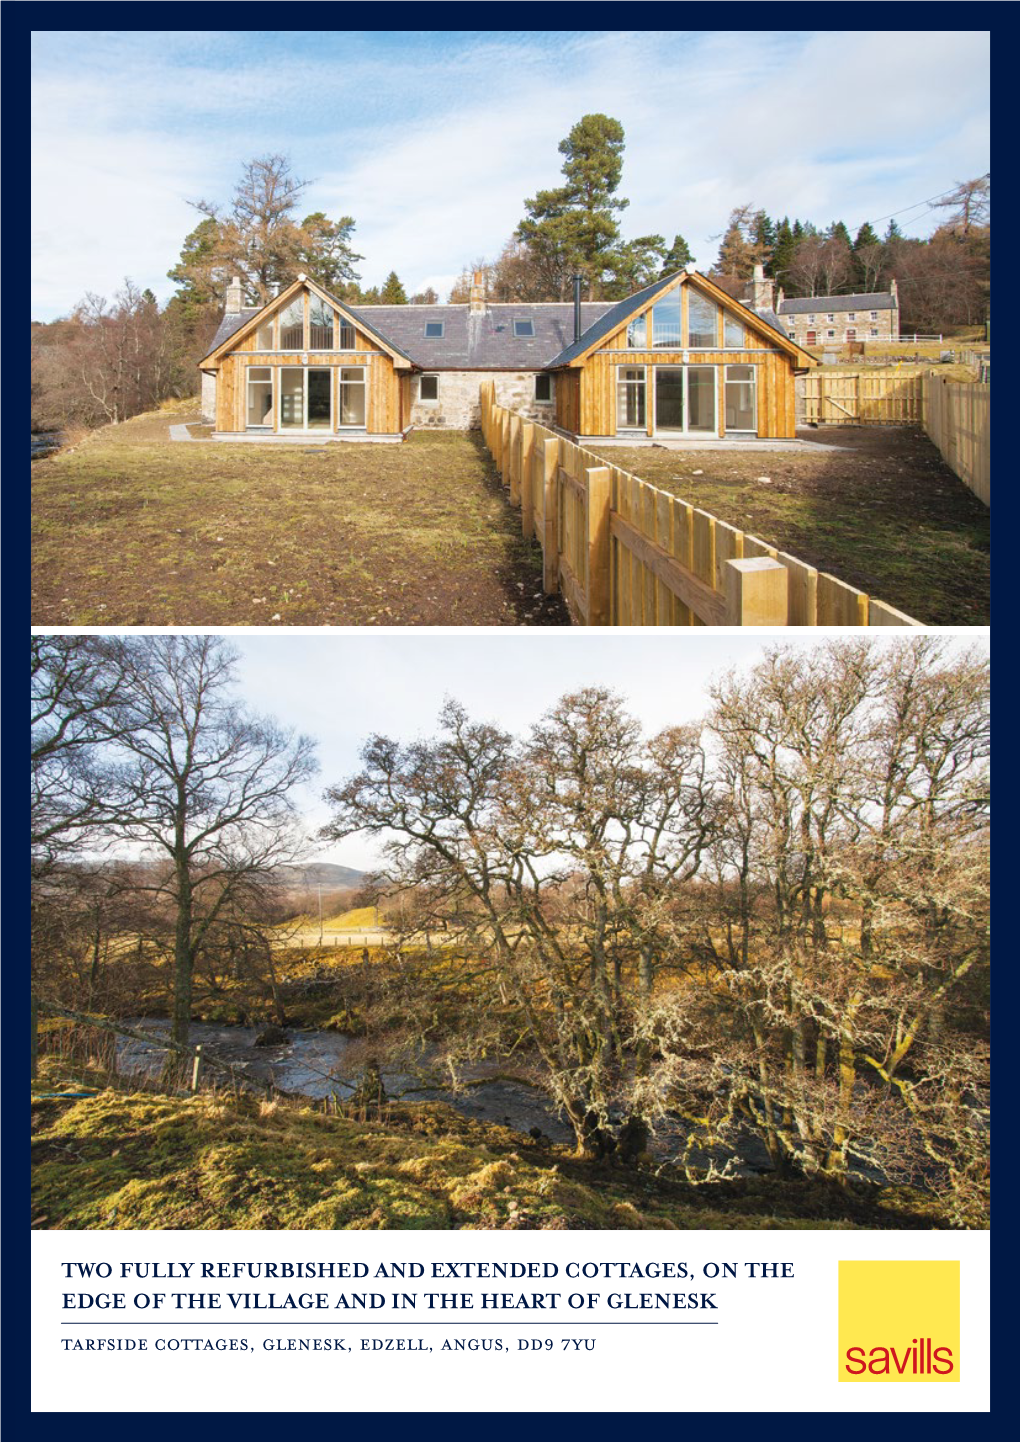 TWO FULLY REFURBISHED and EXTENDED COTTAGES, on the EDGE of the VILLAGE and in the HEART of GLENESK Tarfside Cottages, Glenesk